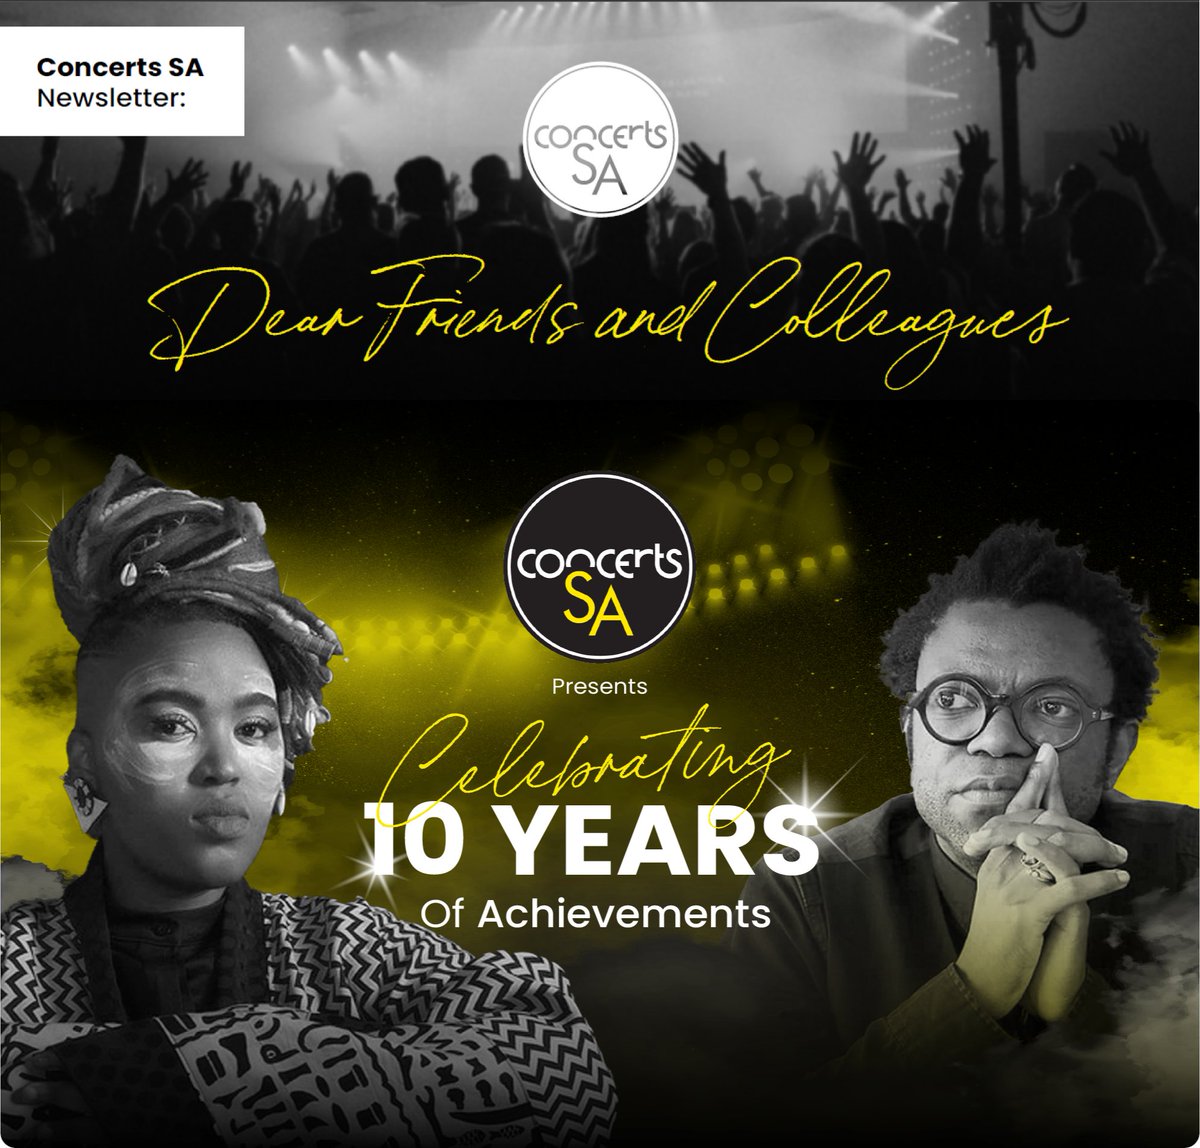 Dear Friends and Colleagues, Concerts SA presents: Celebrating 10 years of achievements! View our full newsletter here: iksafrica.com/newsletter-apr… #Msaki @neomuyanga #CelebratingArts #MusicMatters #CultureMatters #10YearsOfConcertsSA